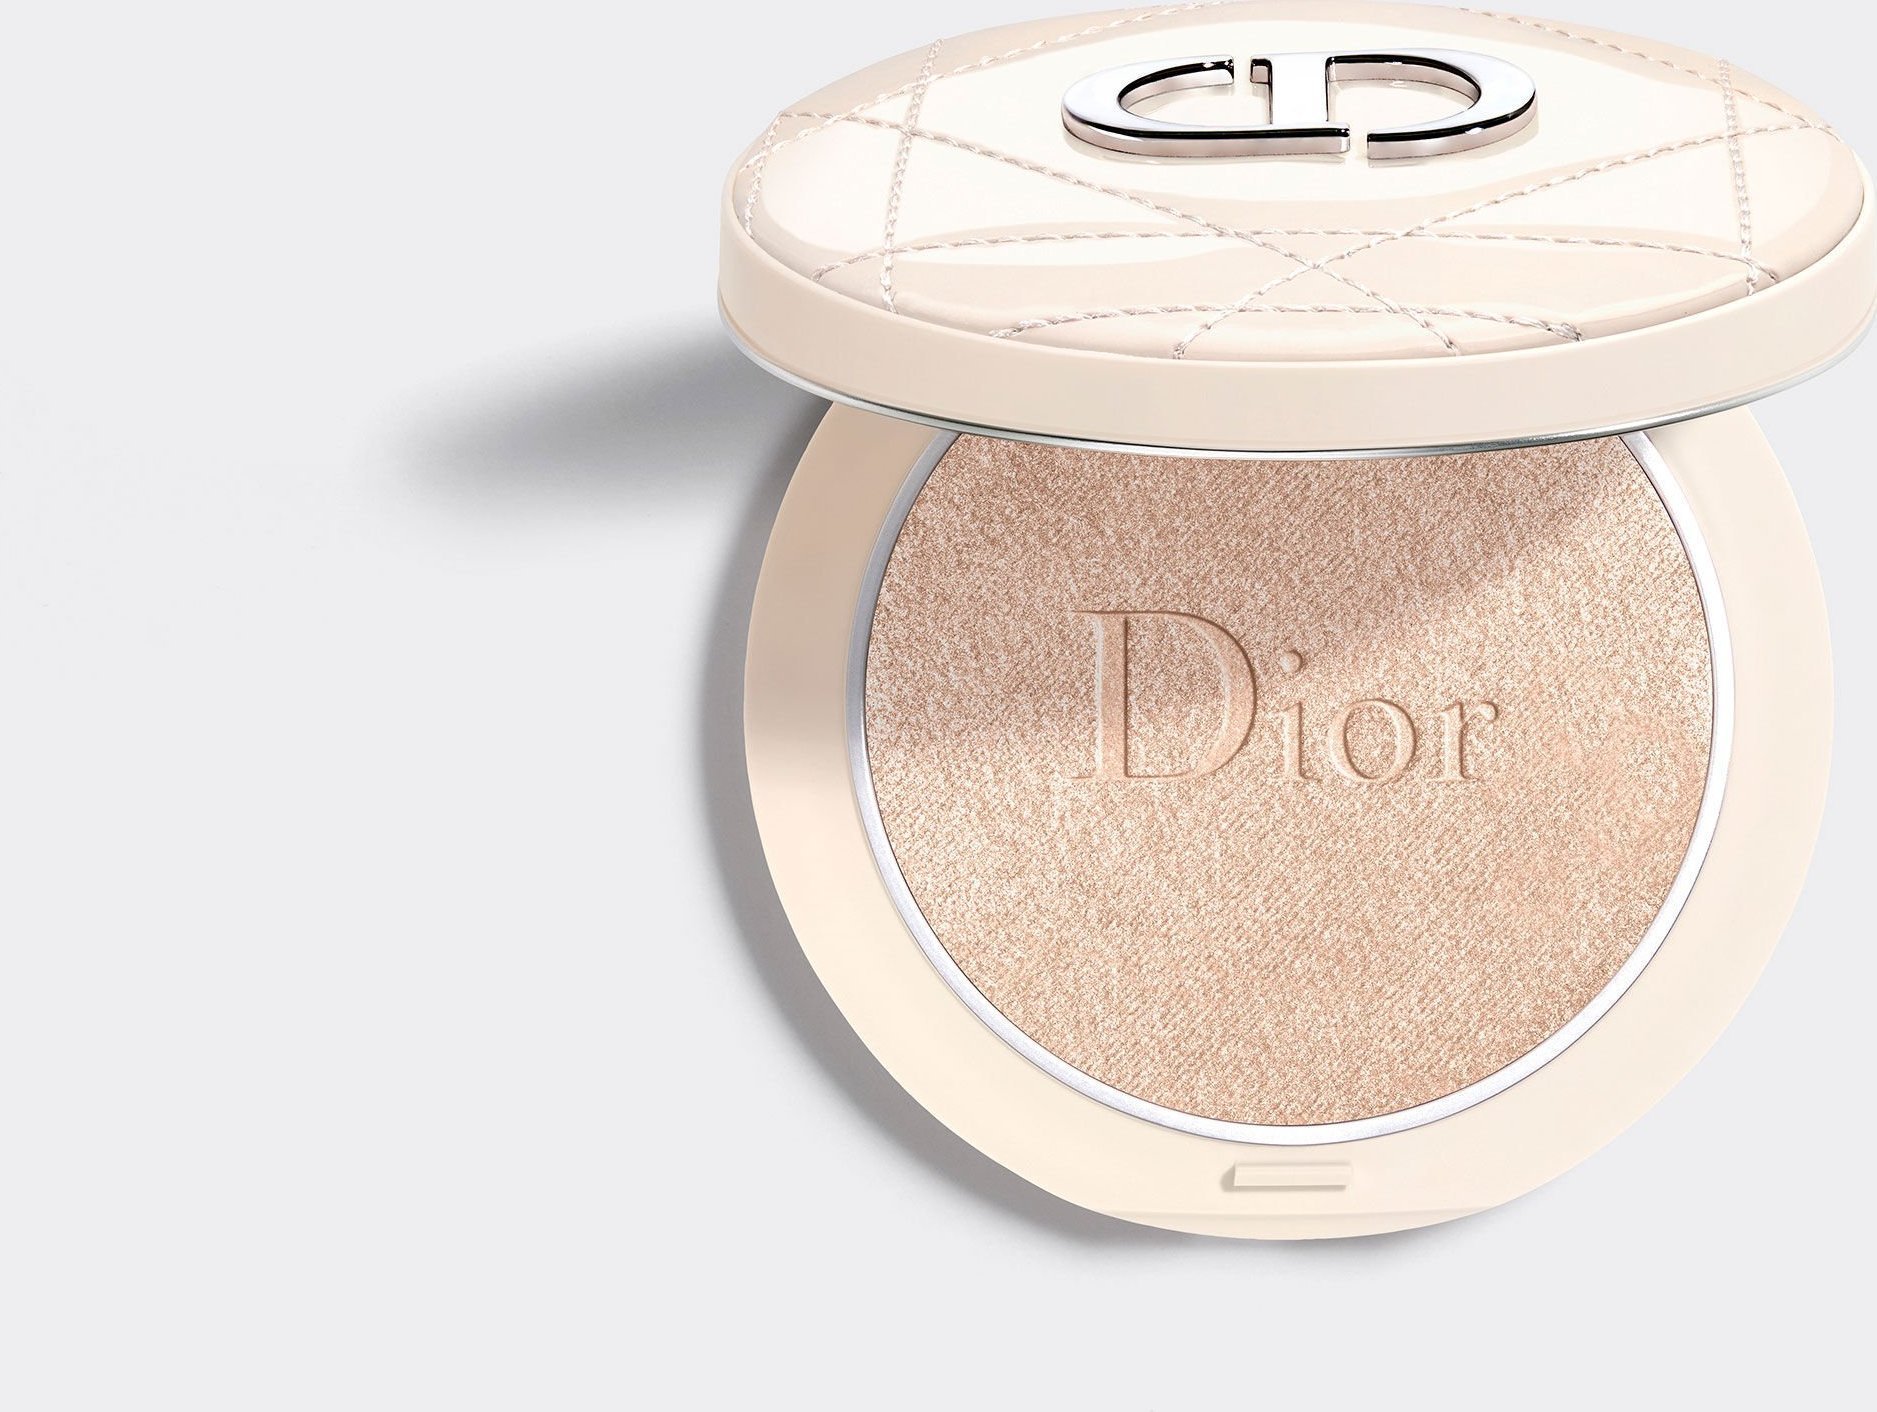 Dior DIOR FOREVER COUTURE LUMINIZER POWDER HIGHLIGHTING 01 NUDE GLOW 6g